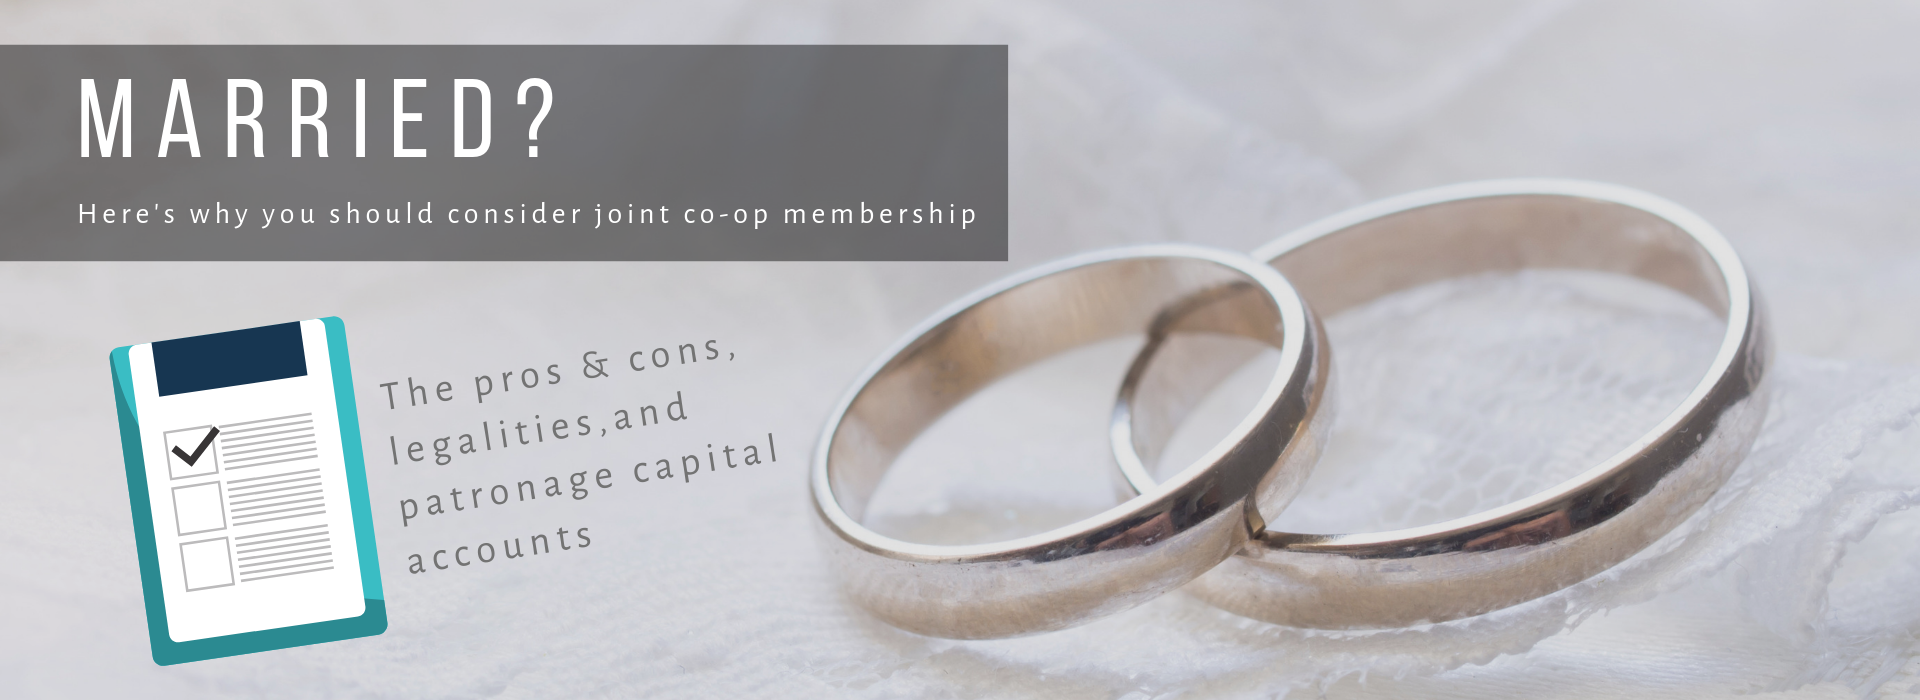 Why to consider a joint co-op membership